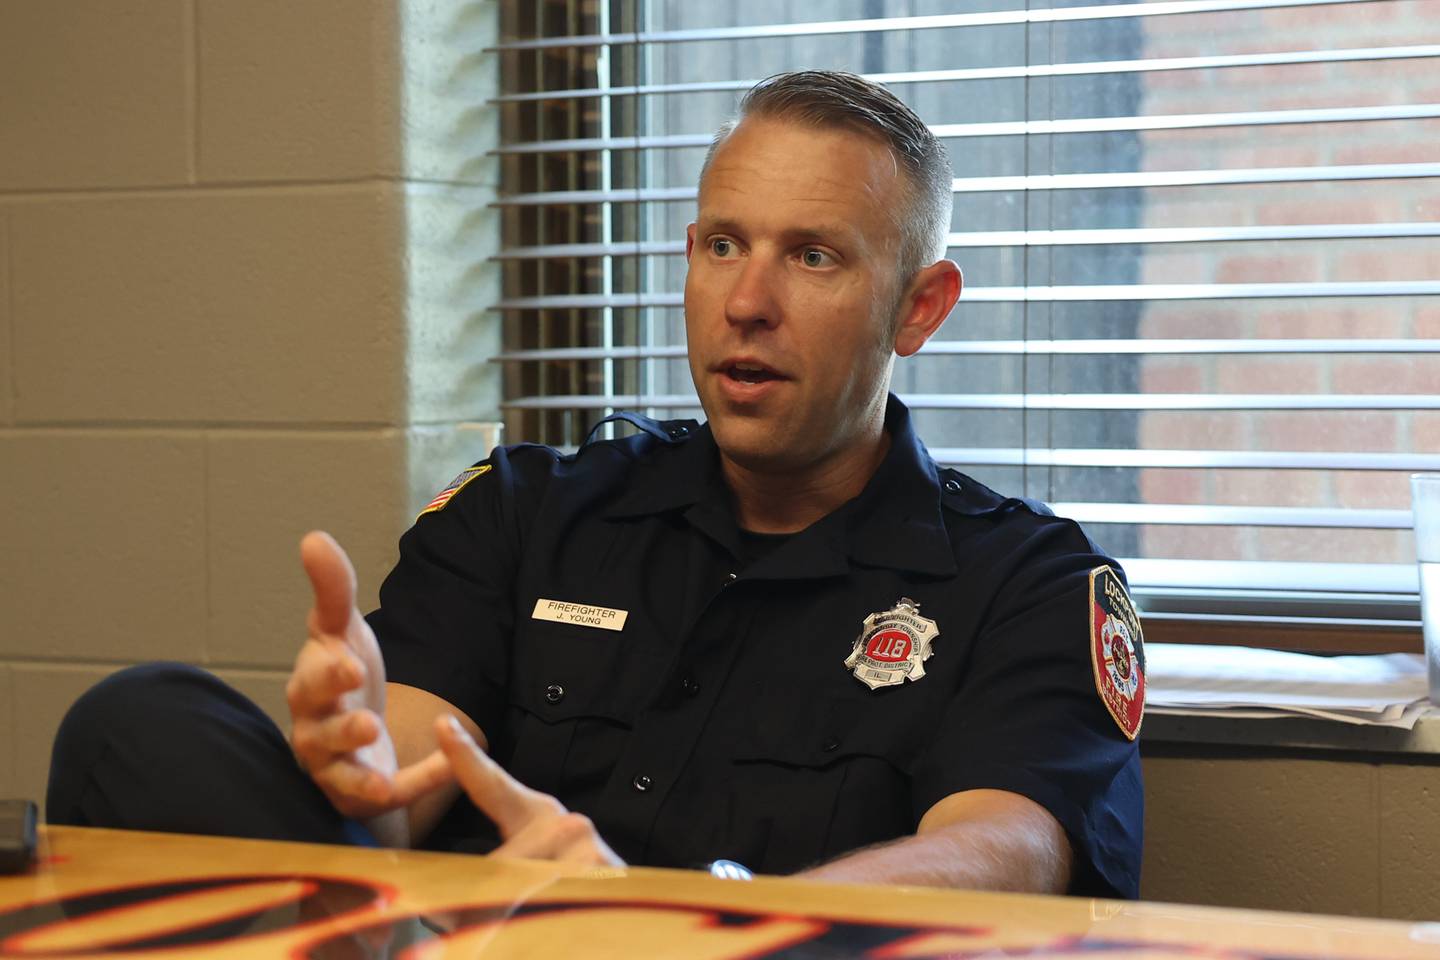 Lockport Firefighter Paramedic Jeff Young goes through the signs they look for before administering Narcan to an unresponsive person when arriving to a call. Wednesday, July 6, 2022 in Lockport.